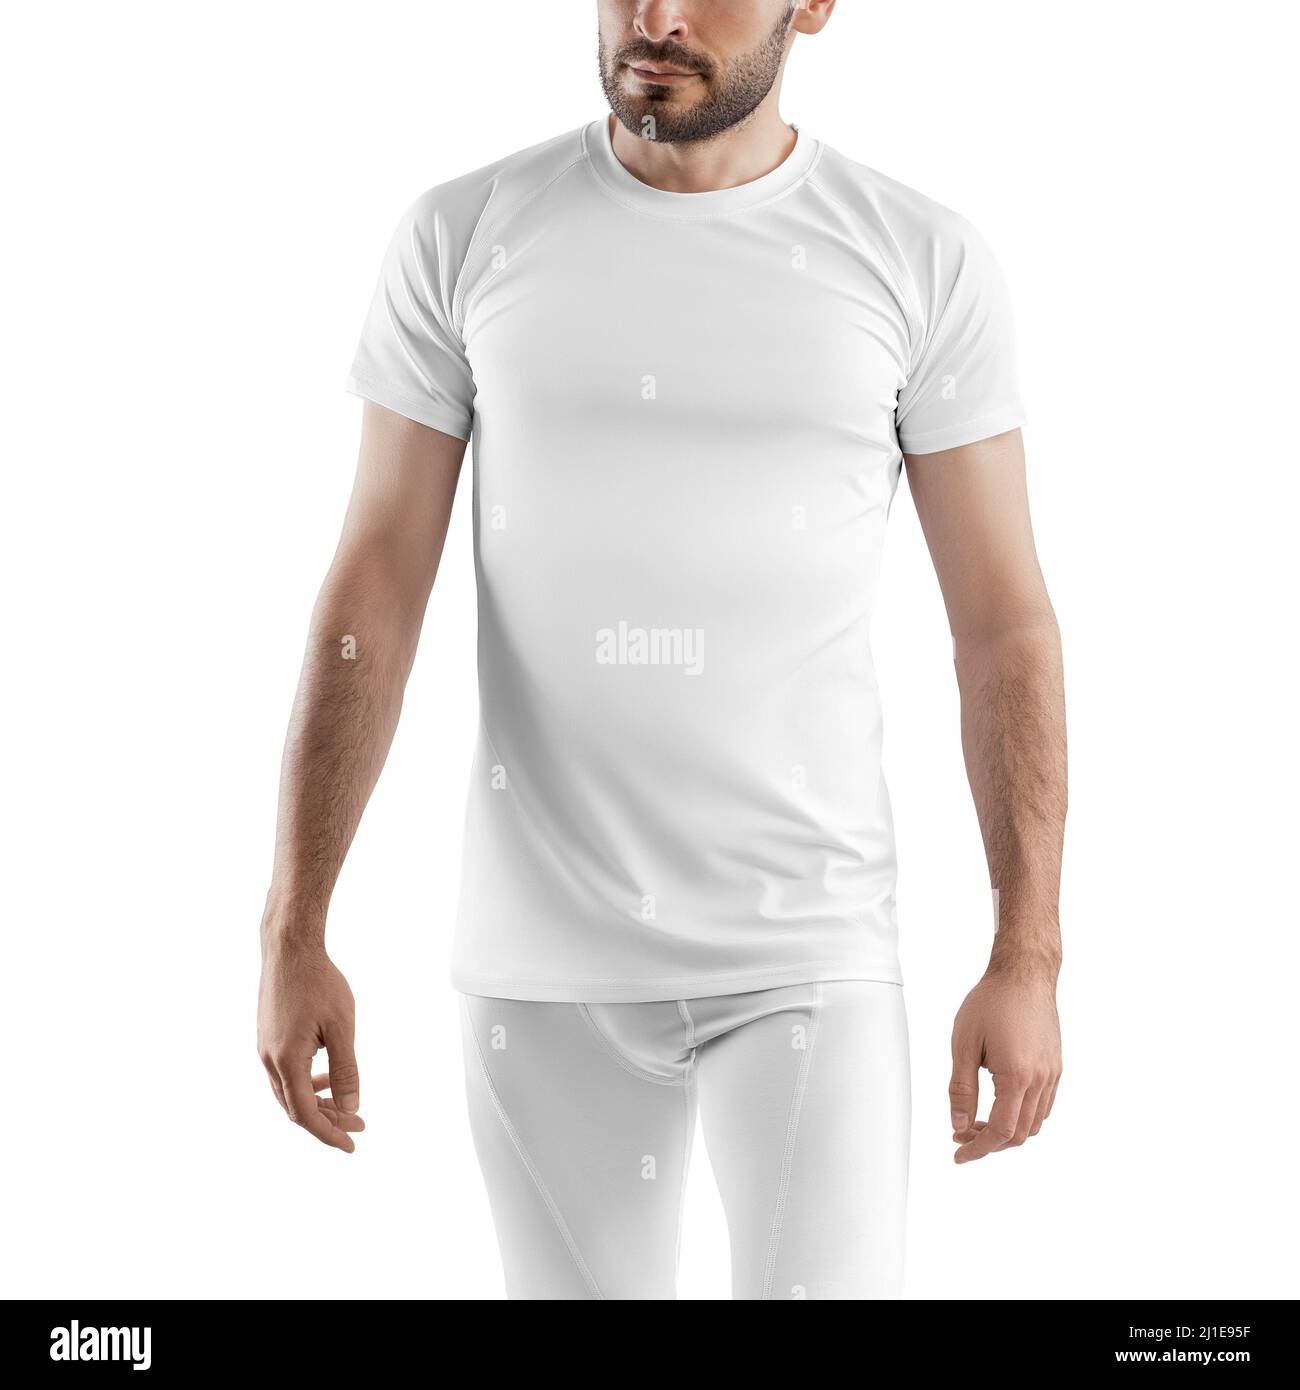 Mockup of white pants and t-shirt on a man. Template of sportswear isolated on background for design presentation. Stock Photo